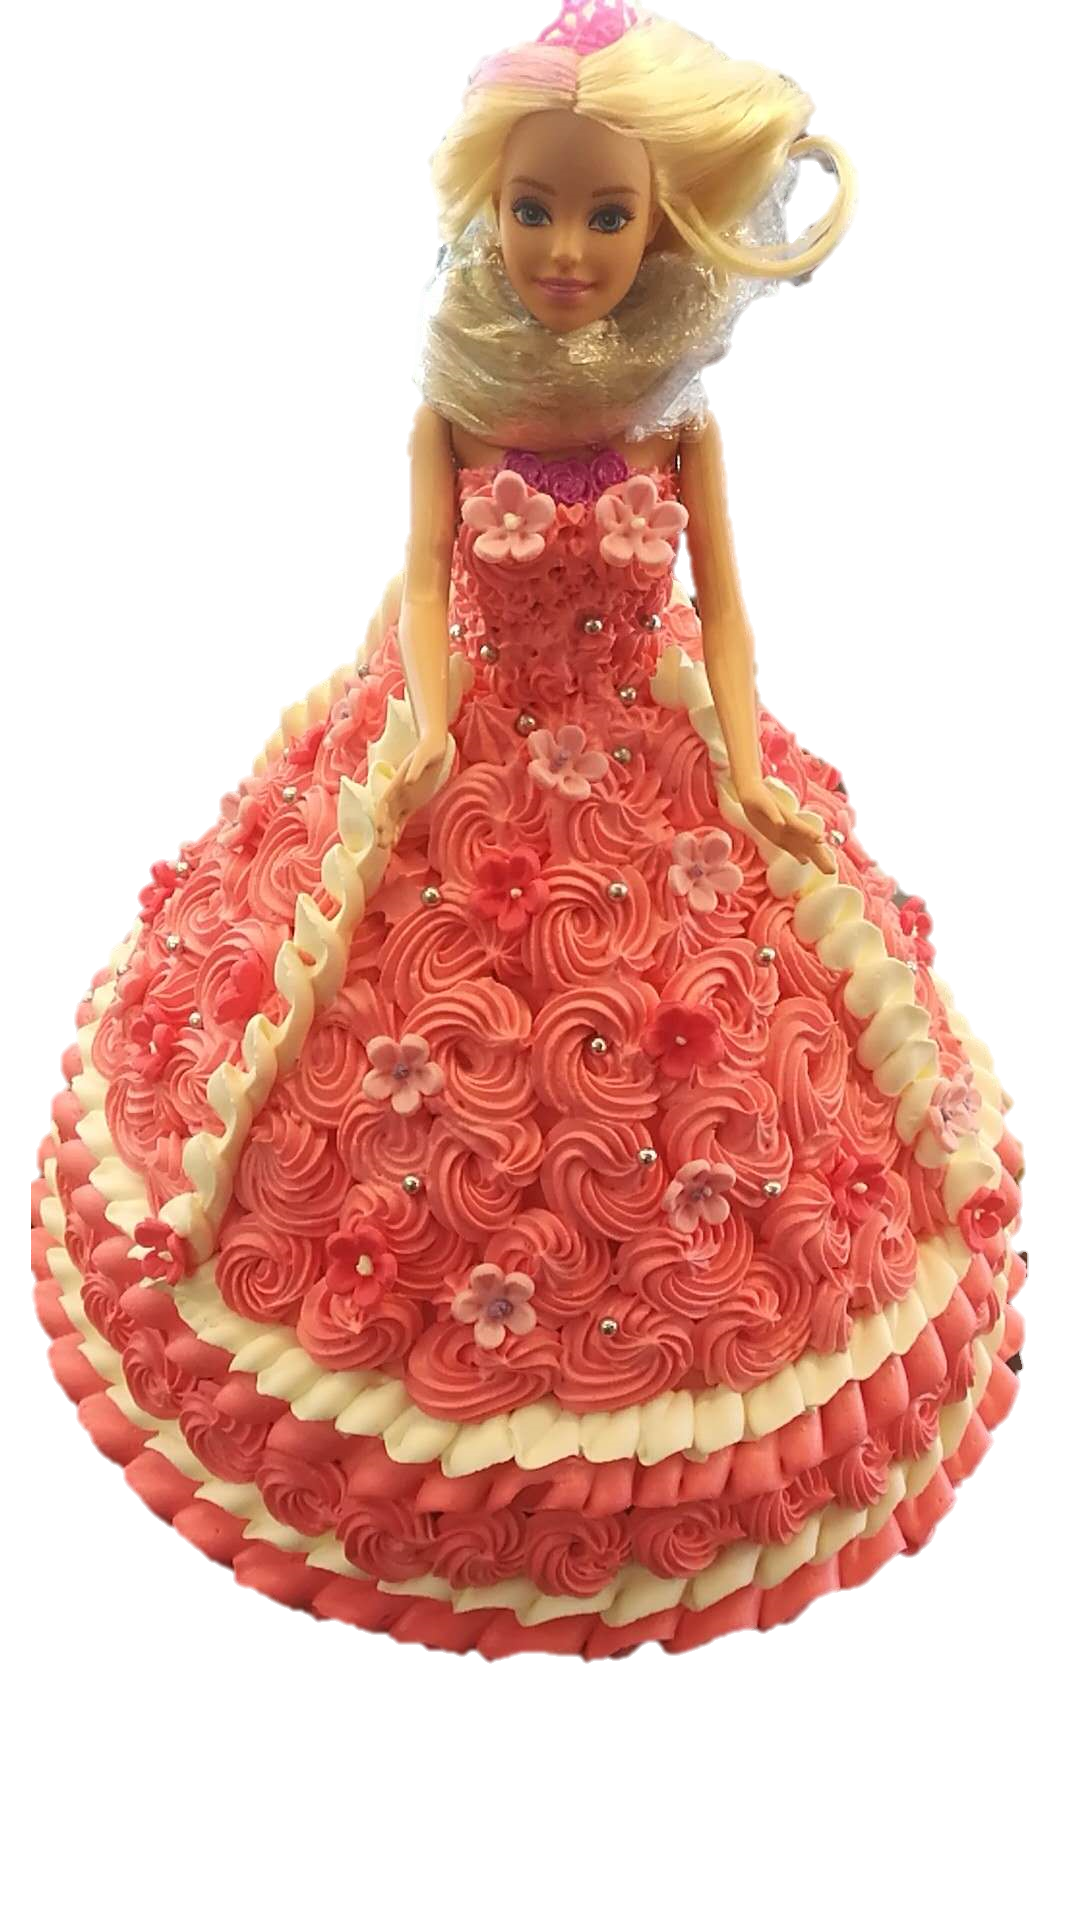 LAYERS AND CRUNCH - Barbie Doll Cake Topper/Doll for Cake Decoration